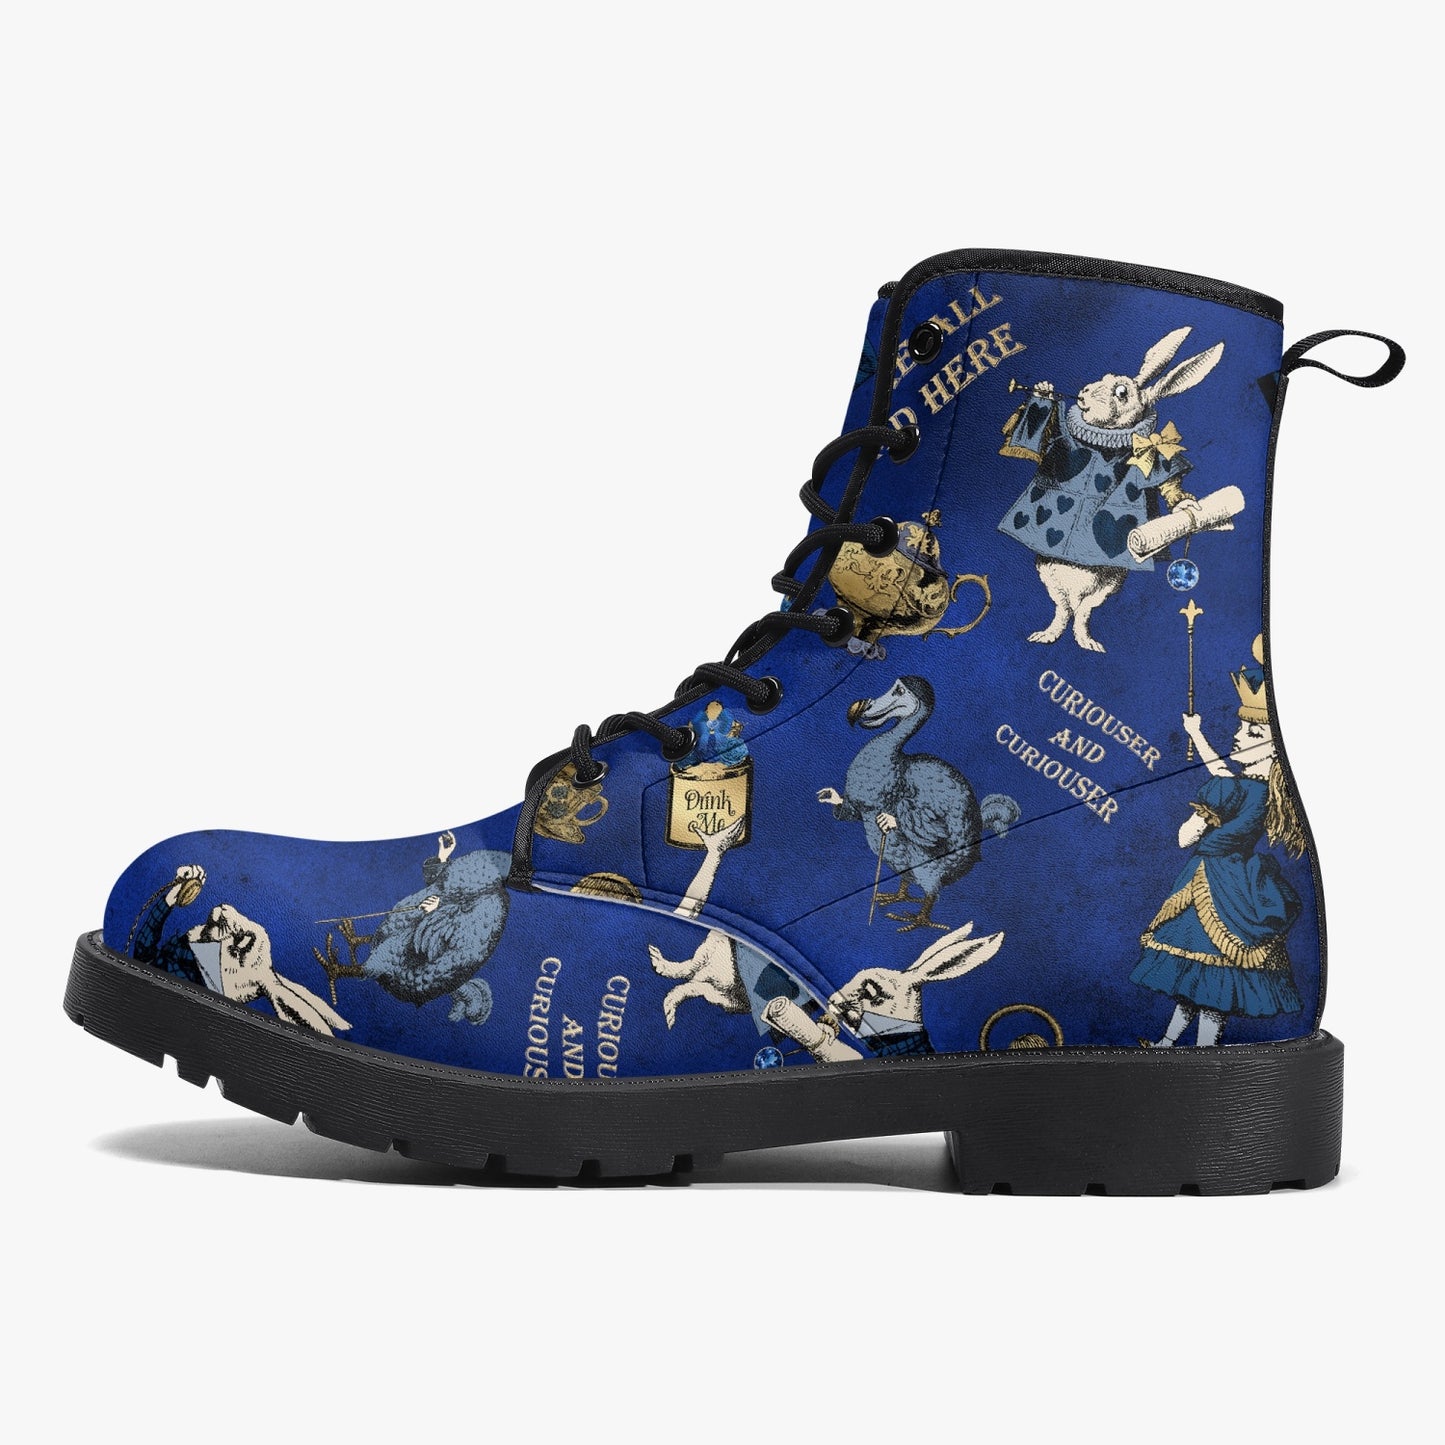 Alice in Wonderland Blue and Gold Combat Boots - Blue Alice Cosplay Boots (JPREGBG)